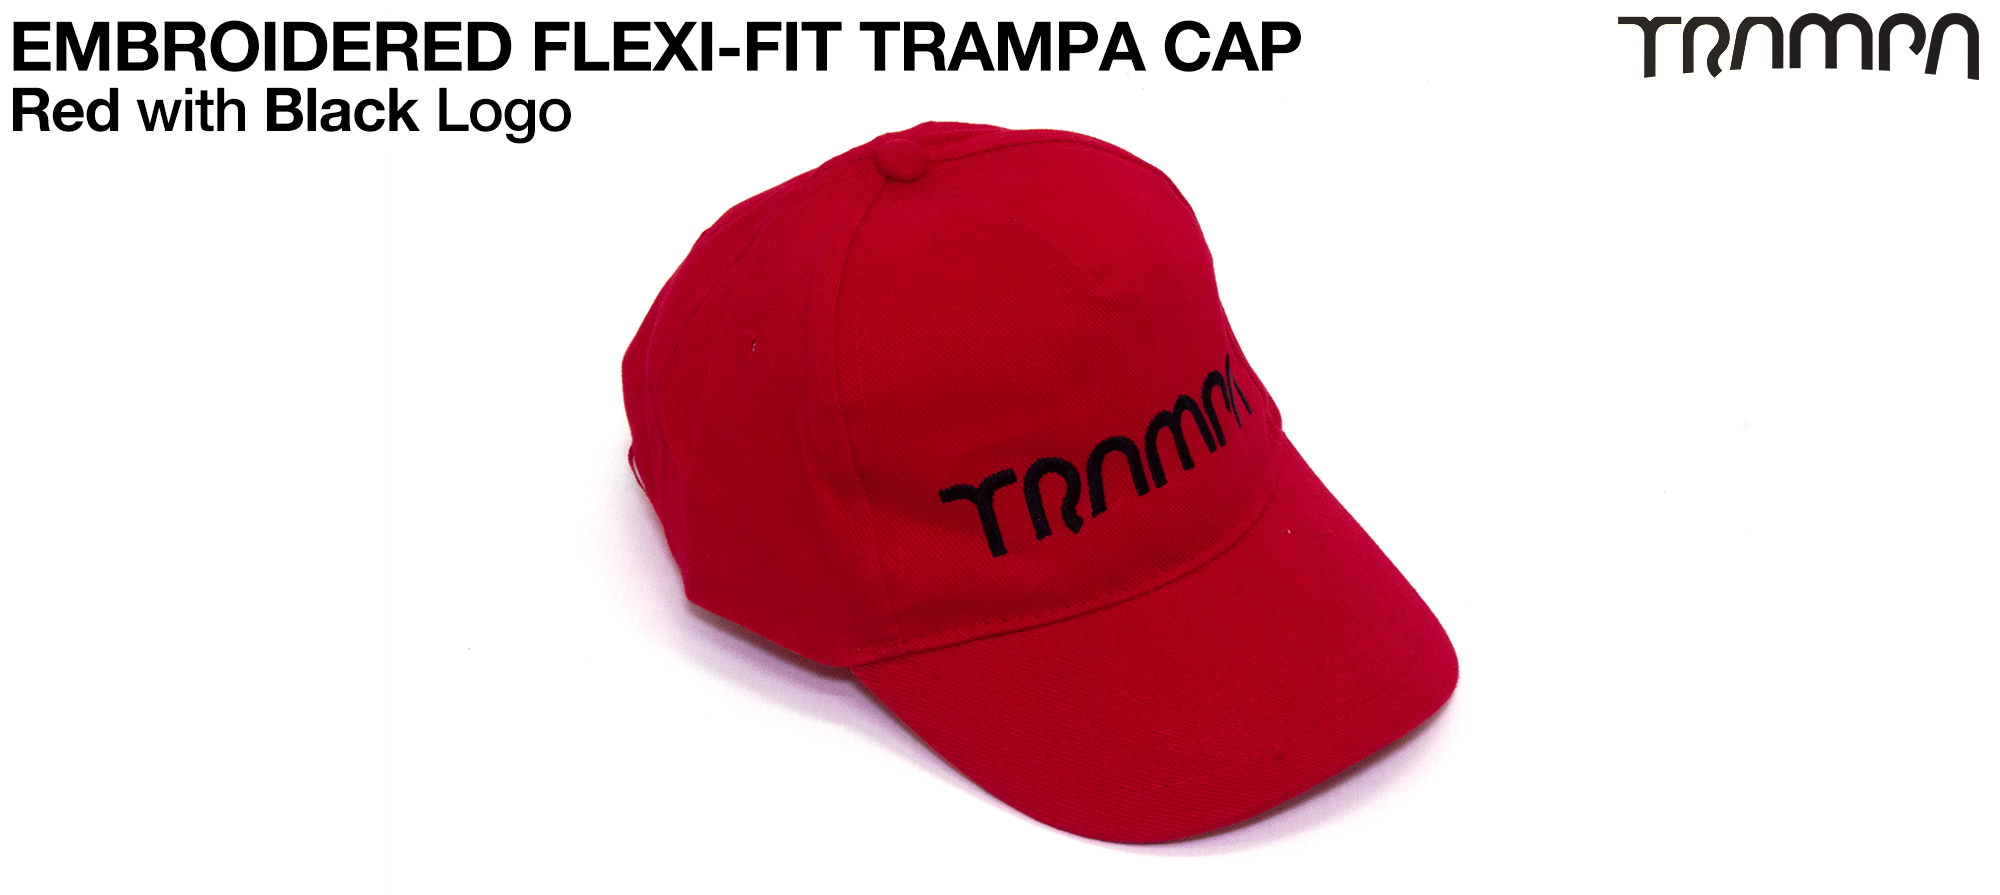 RED FLEXI-FIT Baseball Cap with BLACK logo embroidered 